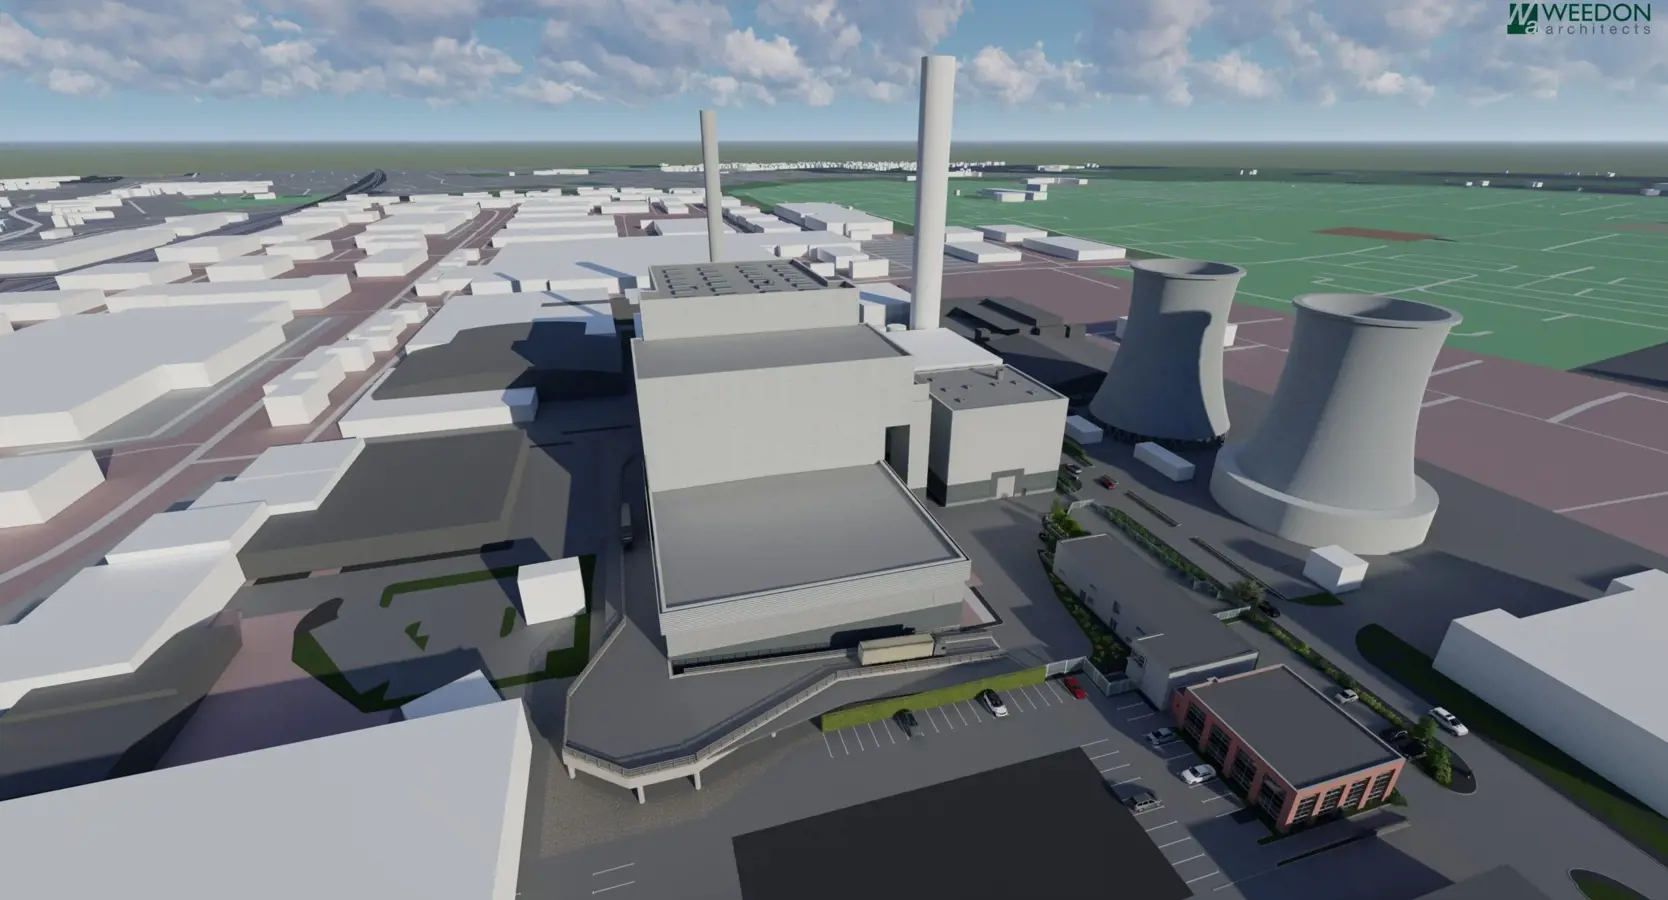 A conceptual vision of the waste-to-energy facility Slough created by Weedon Architects.